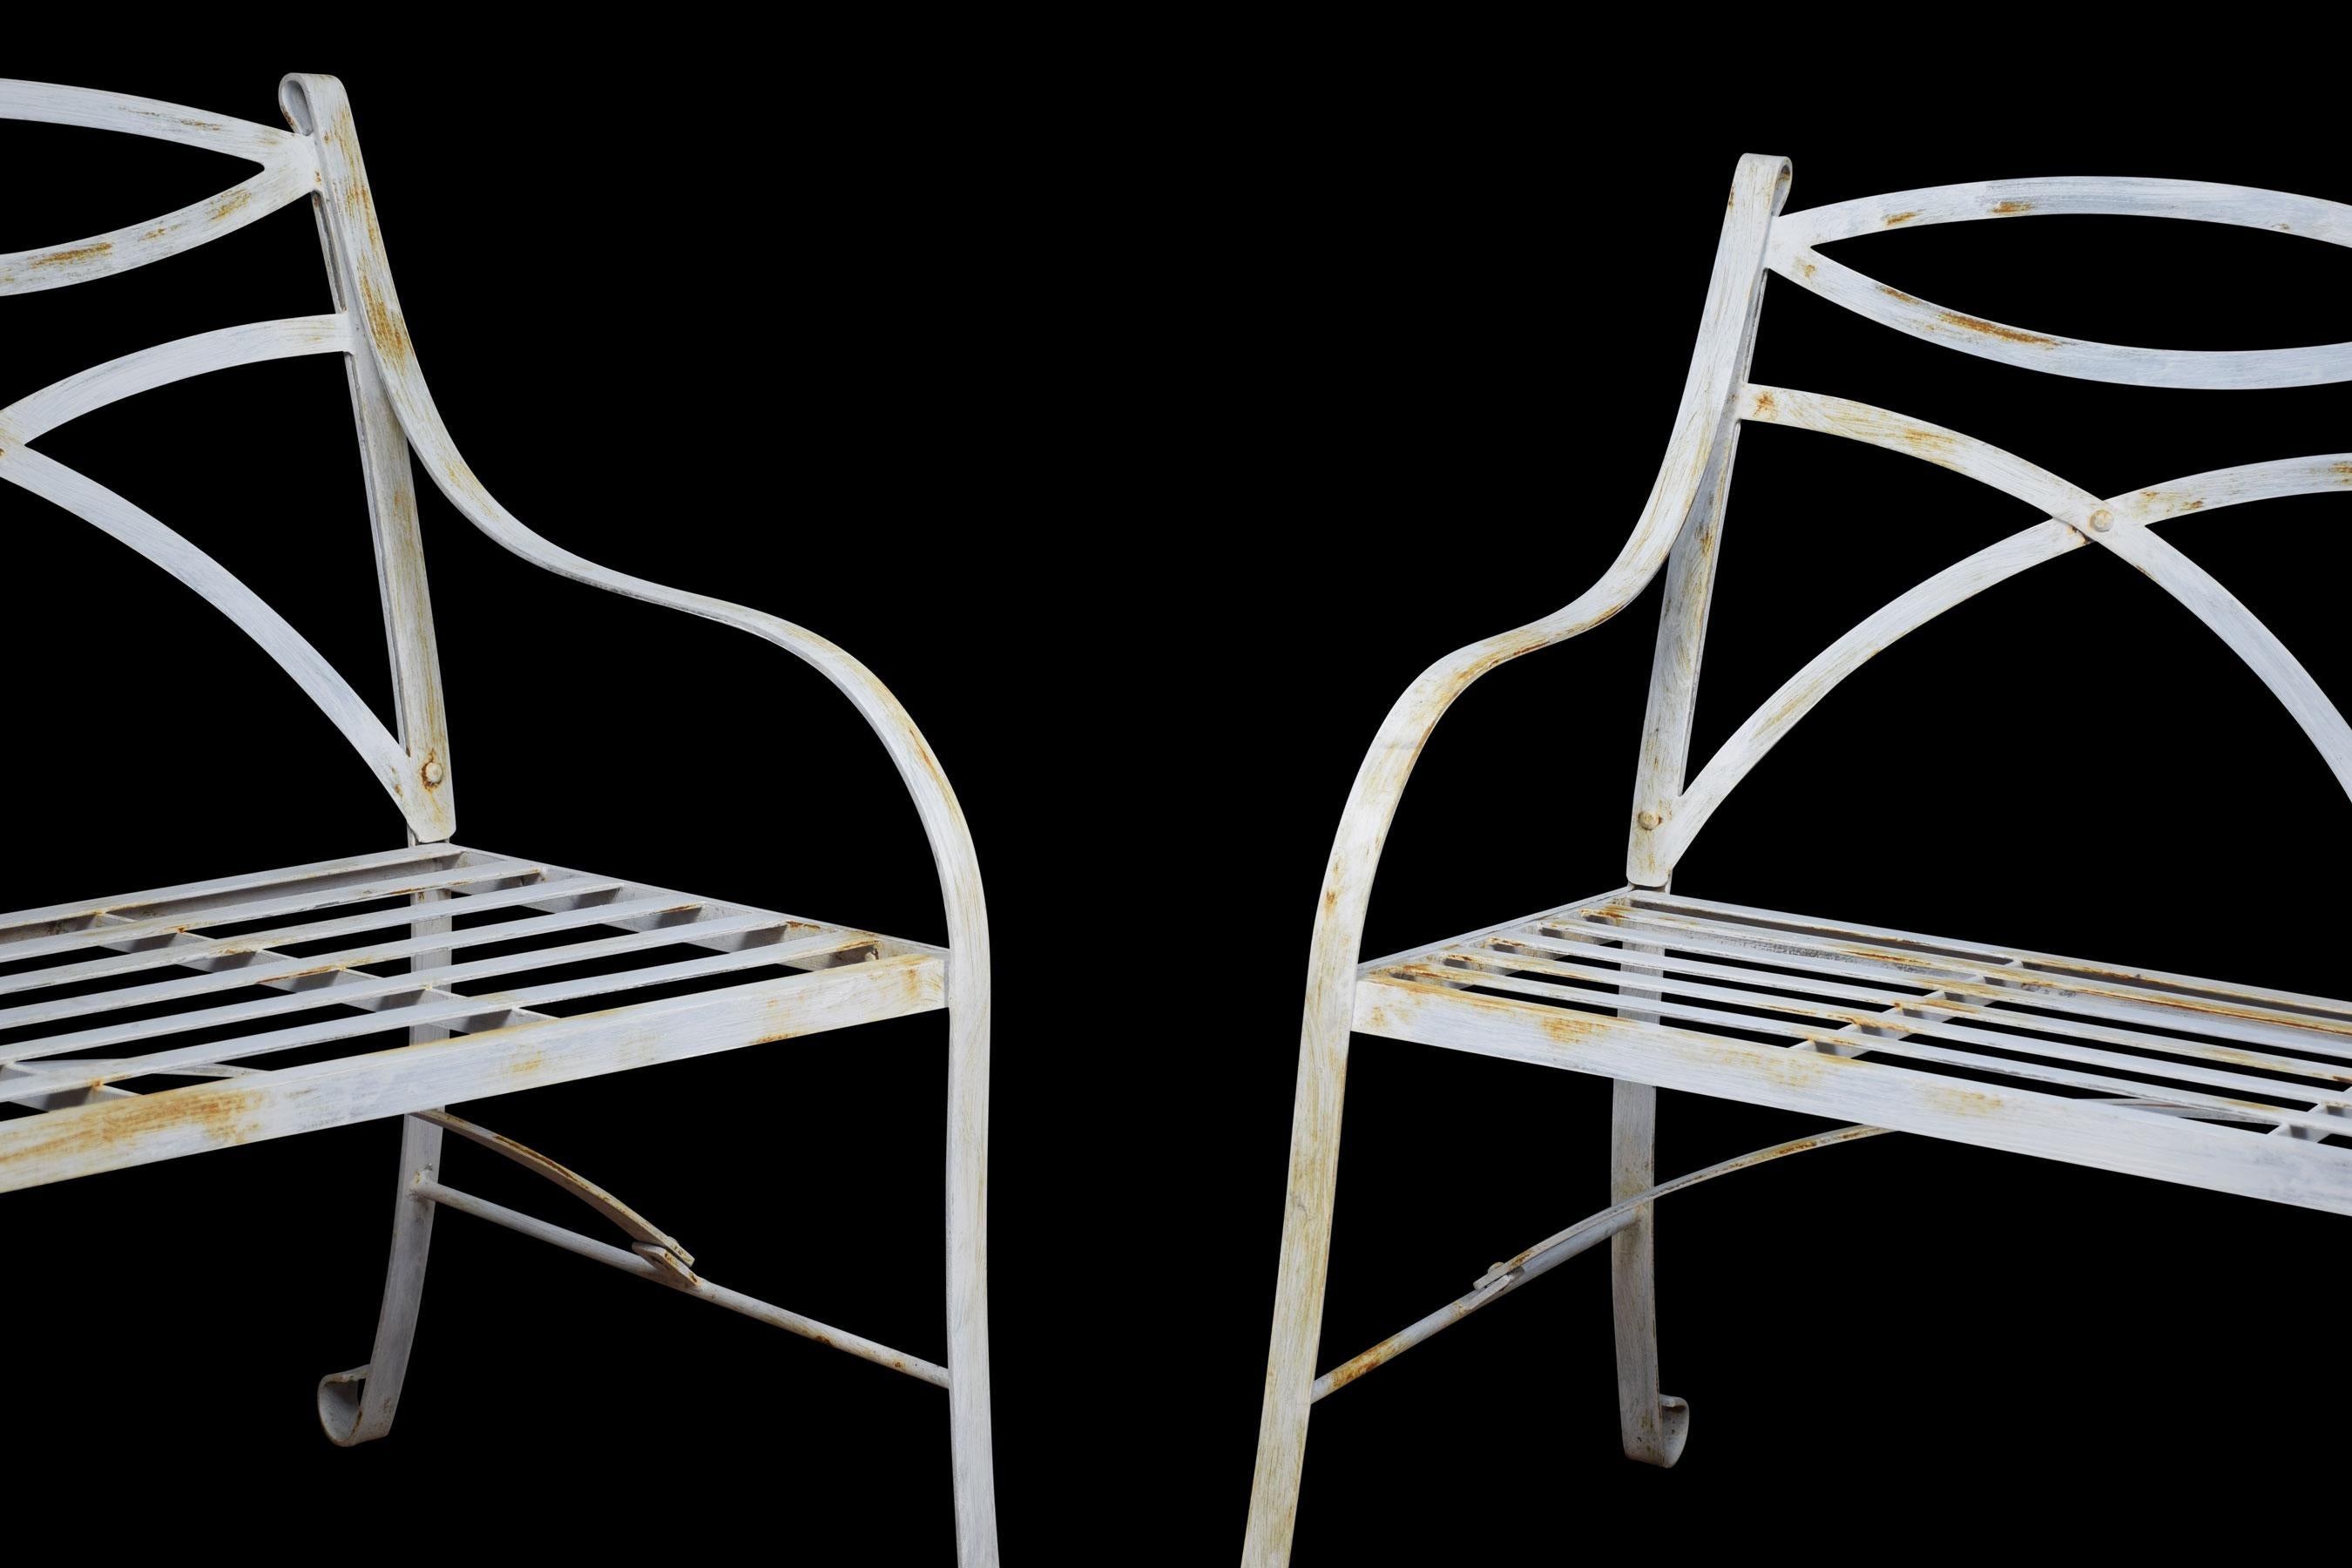 Pair of white painted metal garden benches with curved lattice backs and slatted seats raised up on shaped legs terminating in scrolling toes.
Dimensions:
Height 34.5 inches height to seat 18 inches
Width 43 inches
Depth 28 inches.